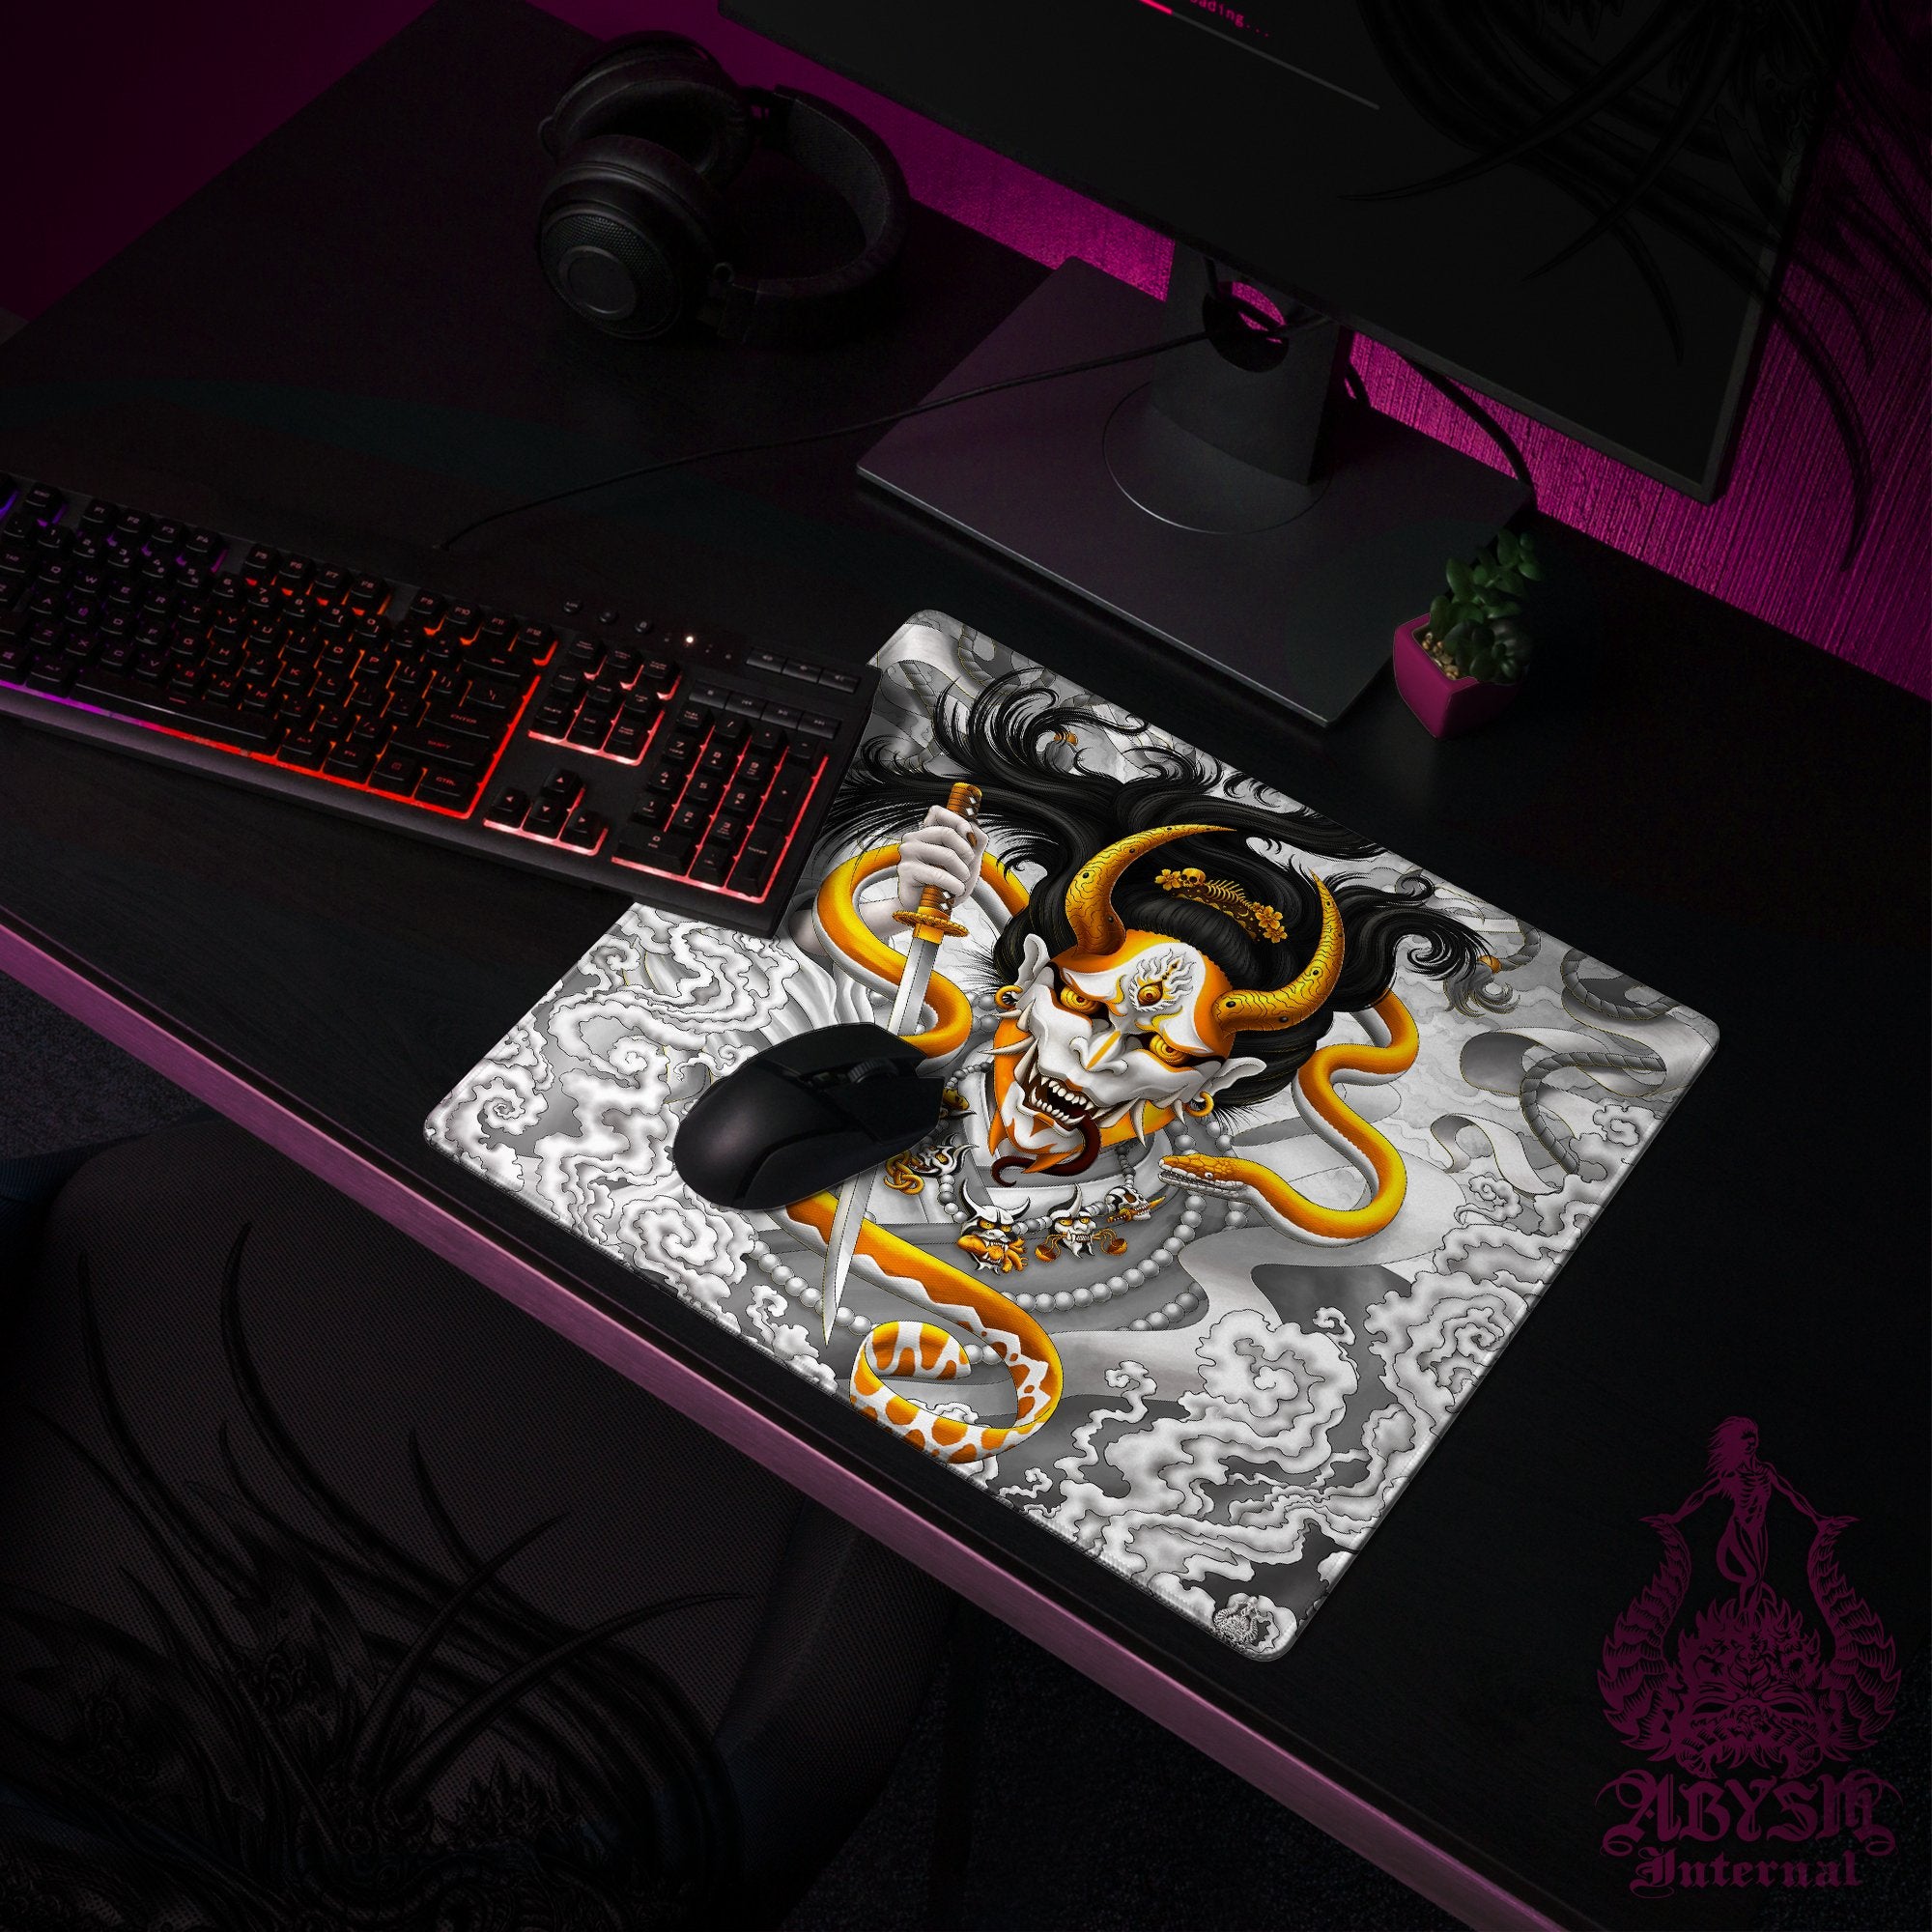 White Japanese Demon Desk Mat, Hannya Gaming Mouse Pad, Youkai Table Protector Cover, Gold Workpad, Fantasy Anime and Manga Art Print - Snake - Abysm Internal